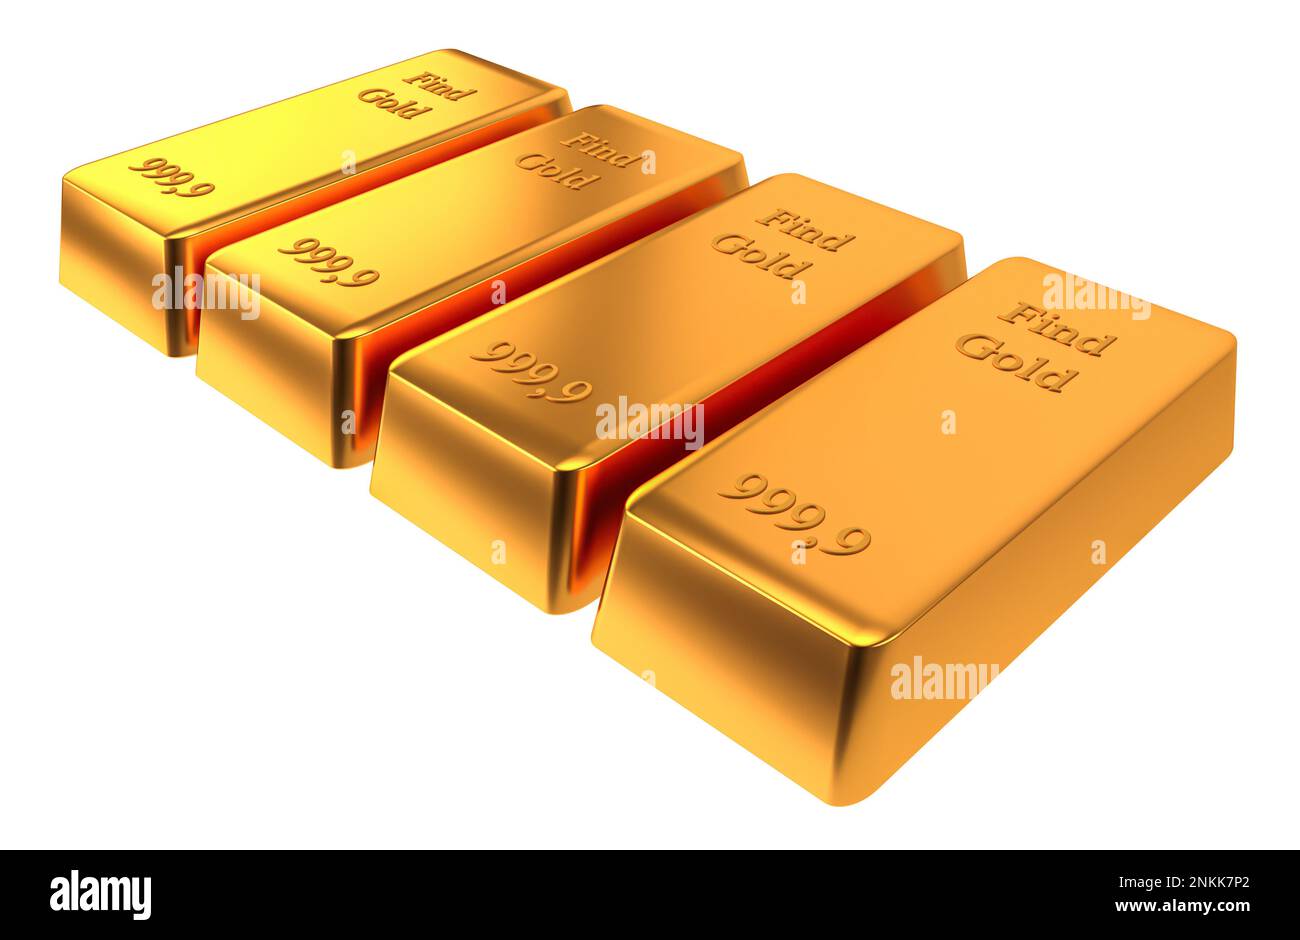 Illustration of gold bank bullion isolated on white. Business and finance concept. Stock Photo